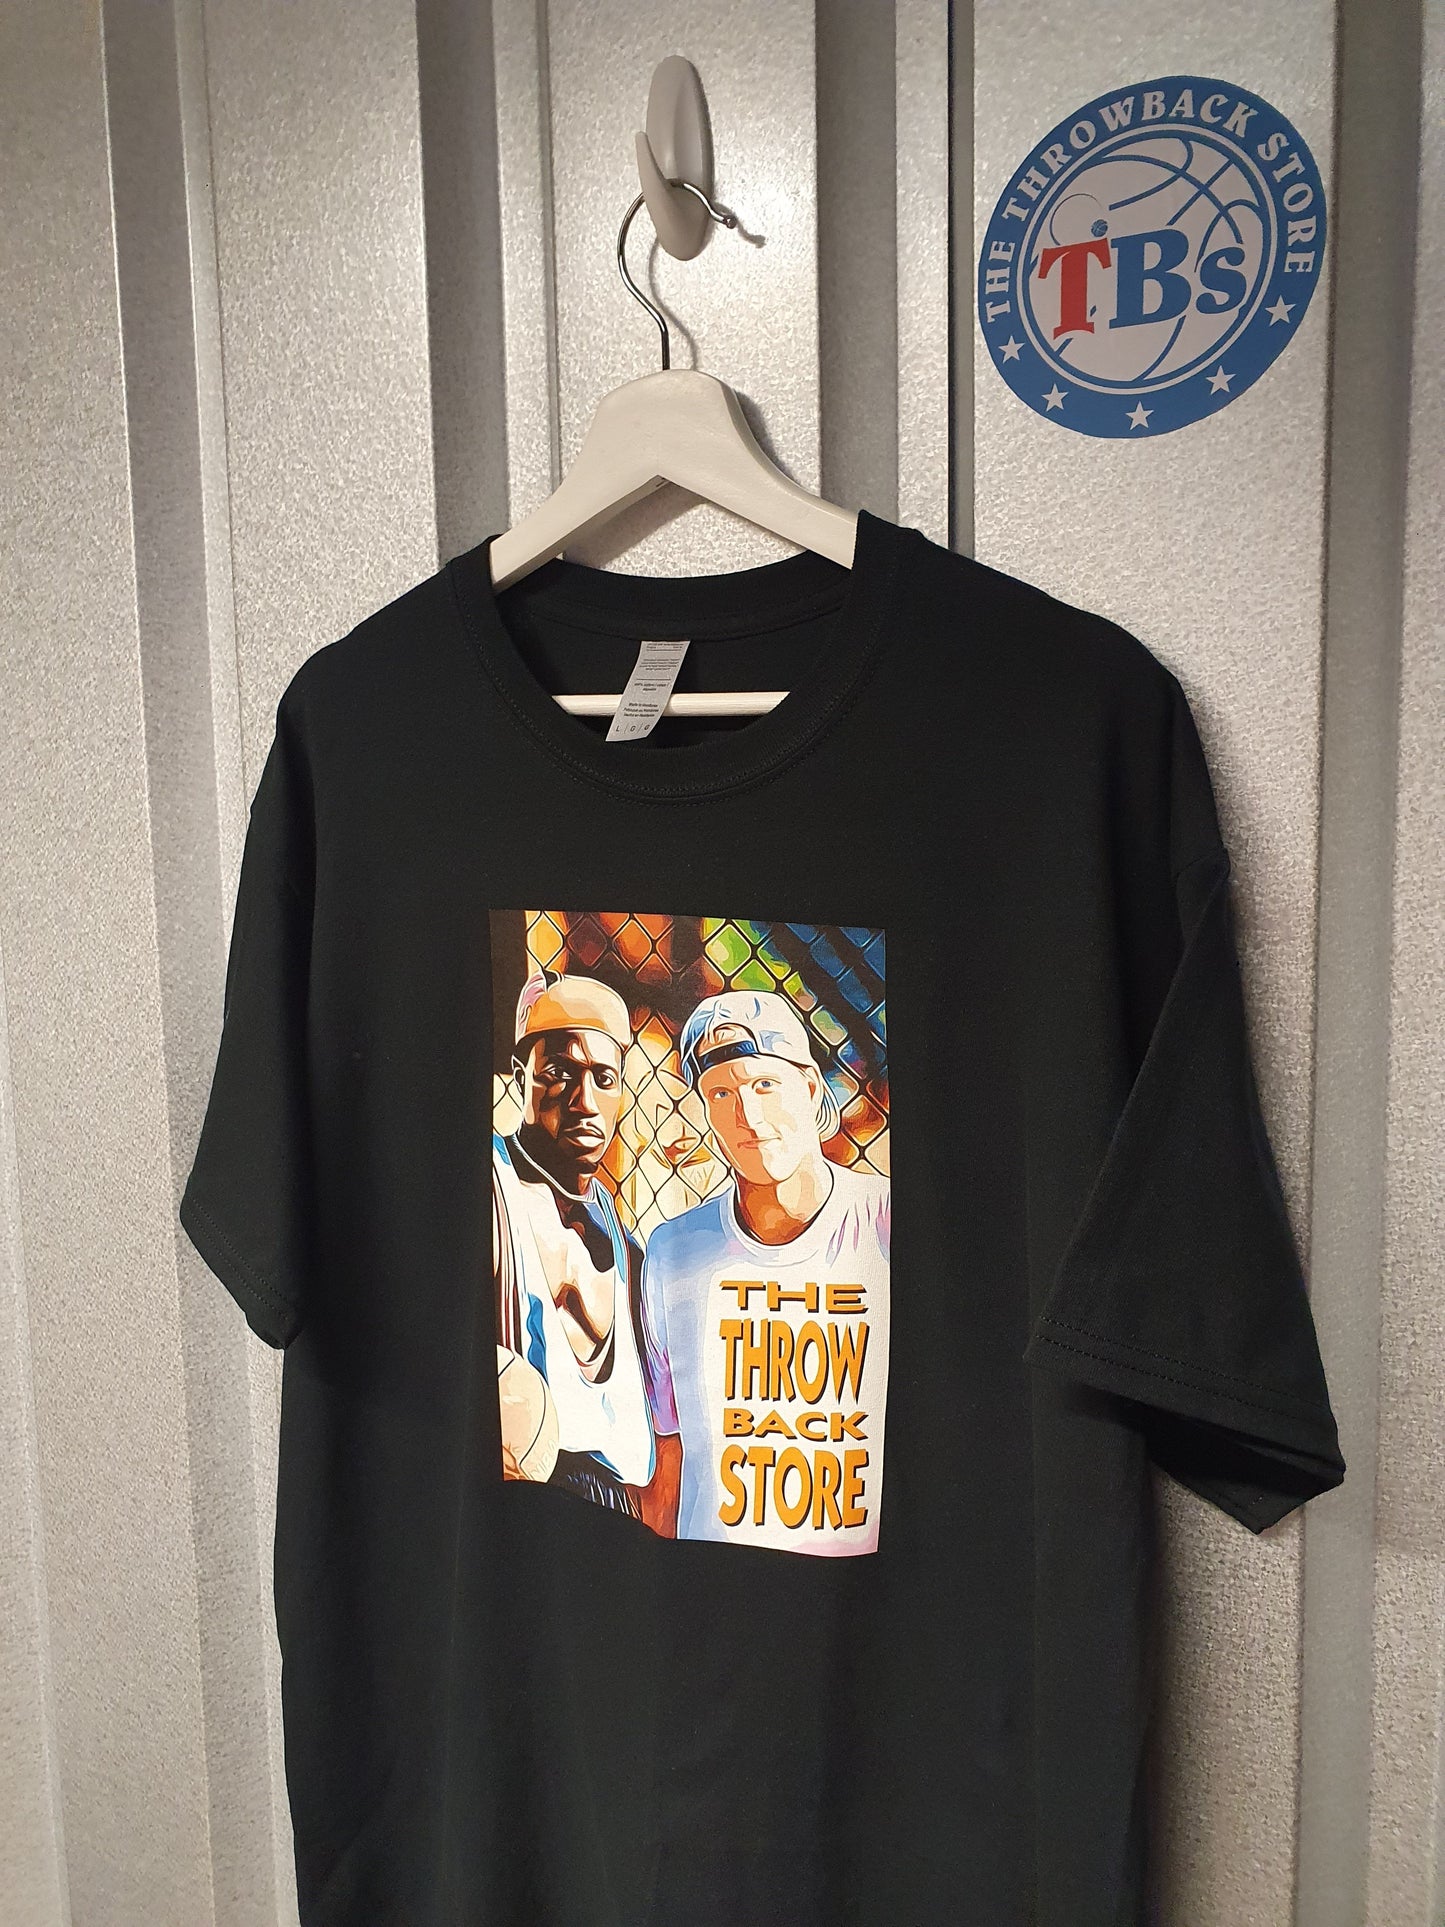 White Men Cant Jump T-Shirt Size S M L and XL